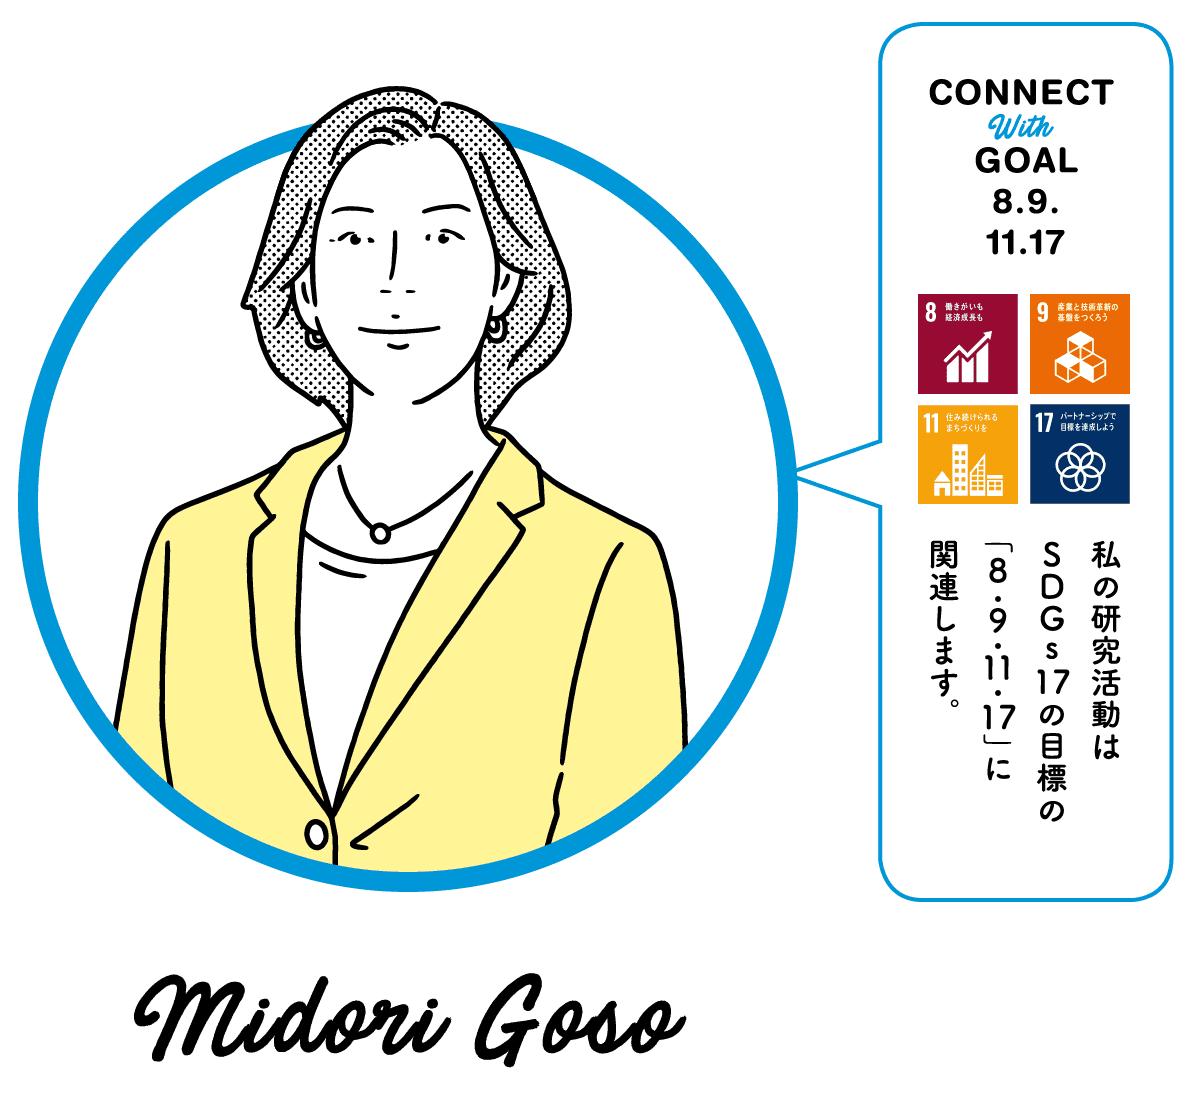 My research activities are related to SDG17 goal "8.9.11.17". Midori Goso